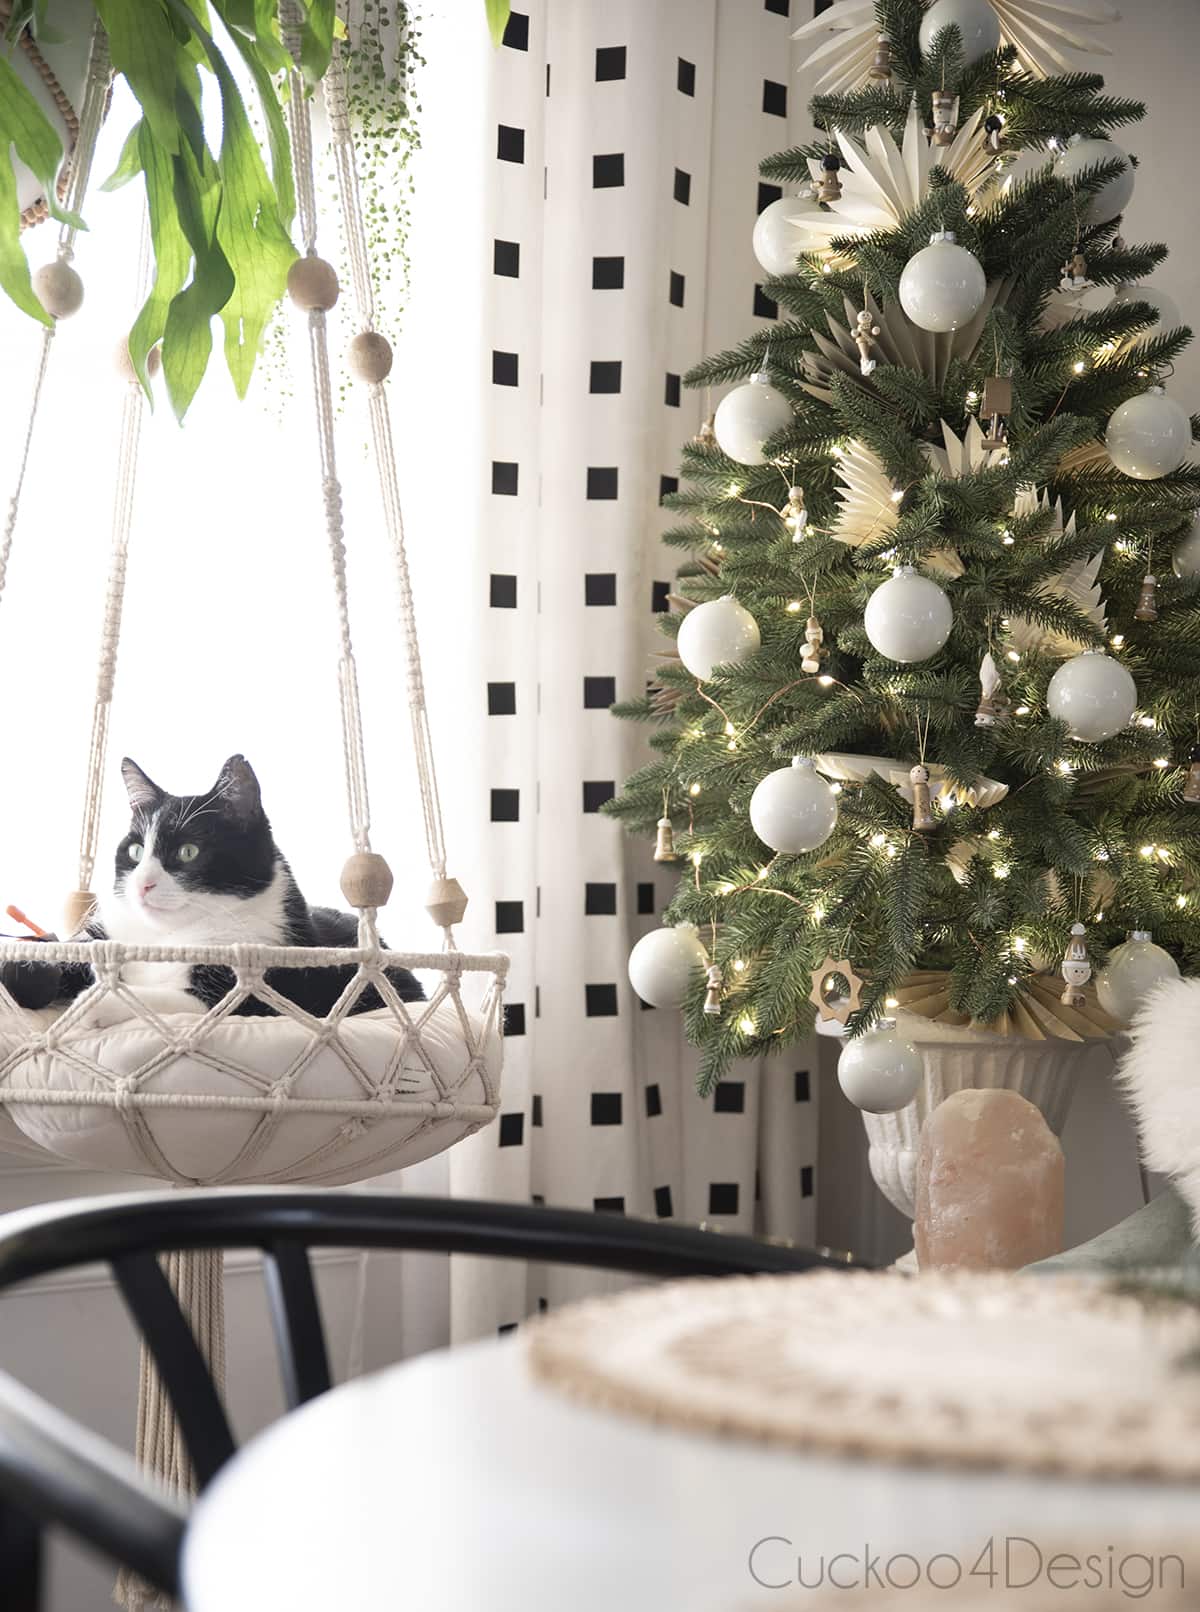 cat in hanging macrame cat bed next to Christmas tree